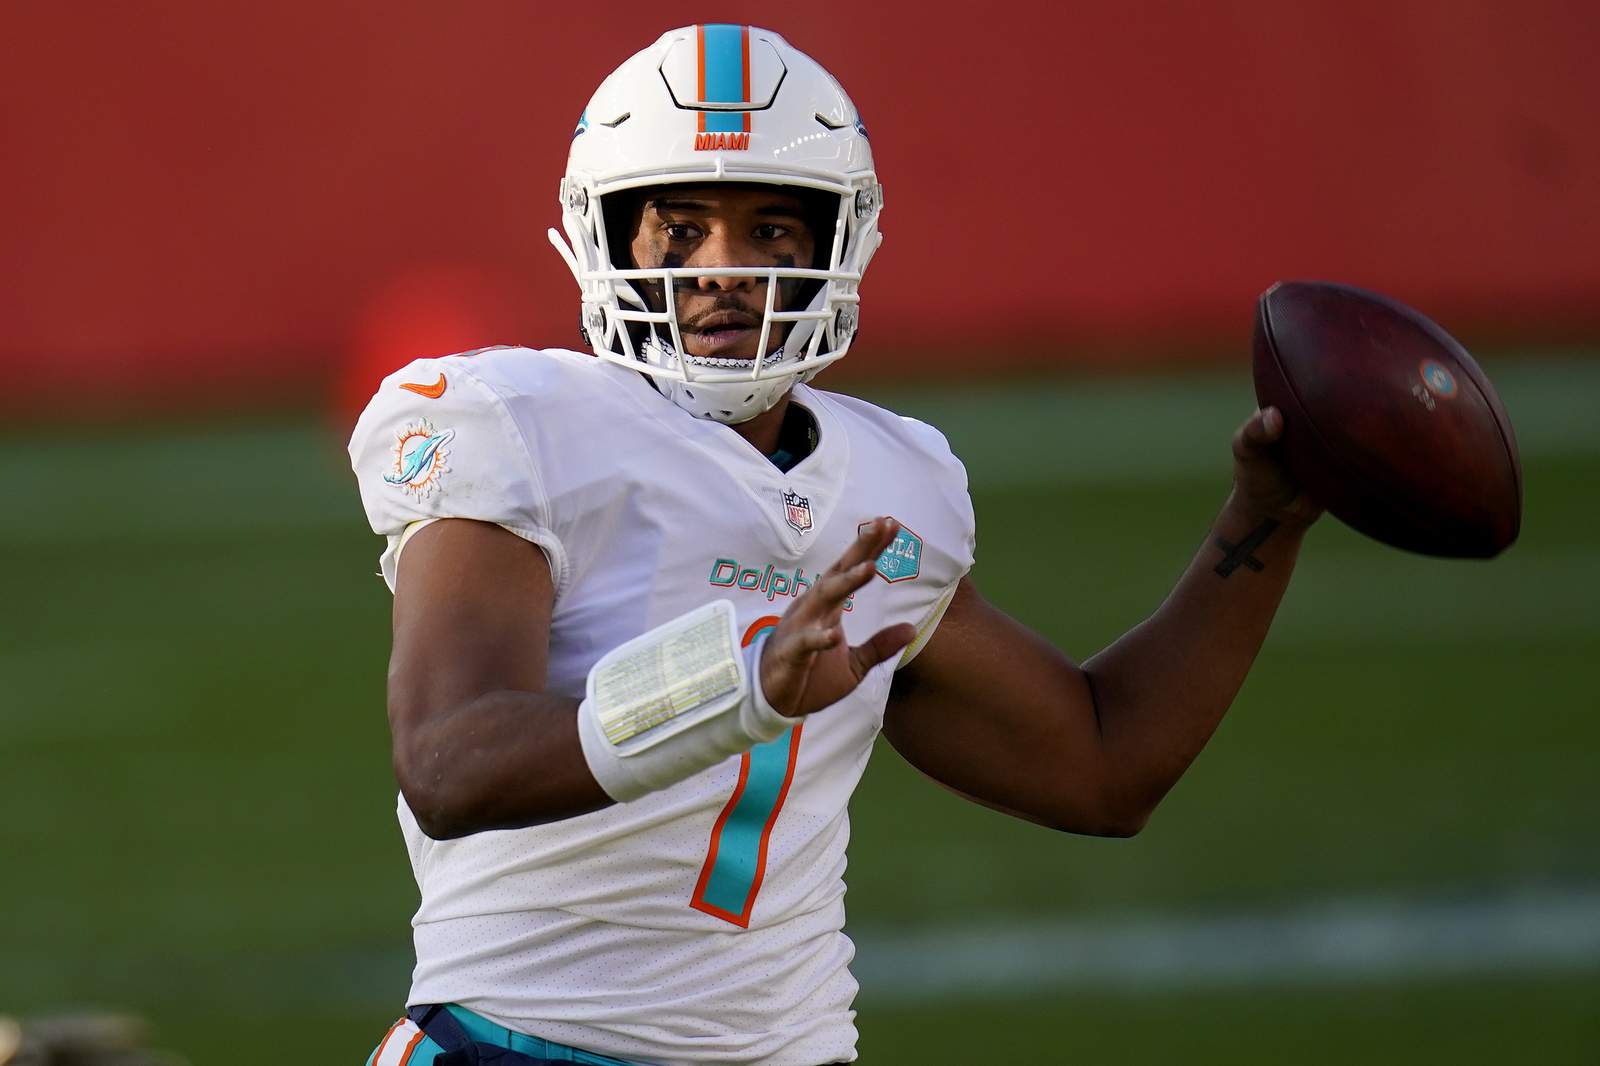 Dolphins vs. Chiefs: How to watch, stream, listen